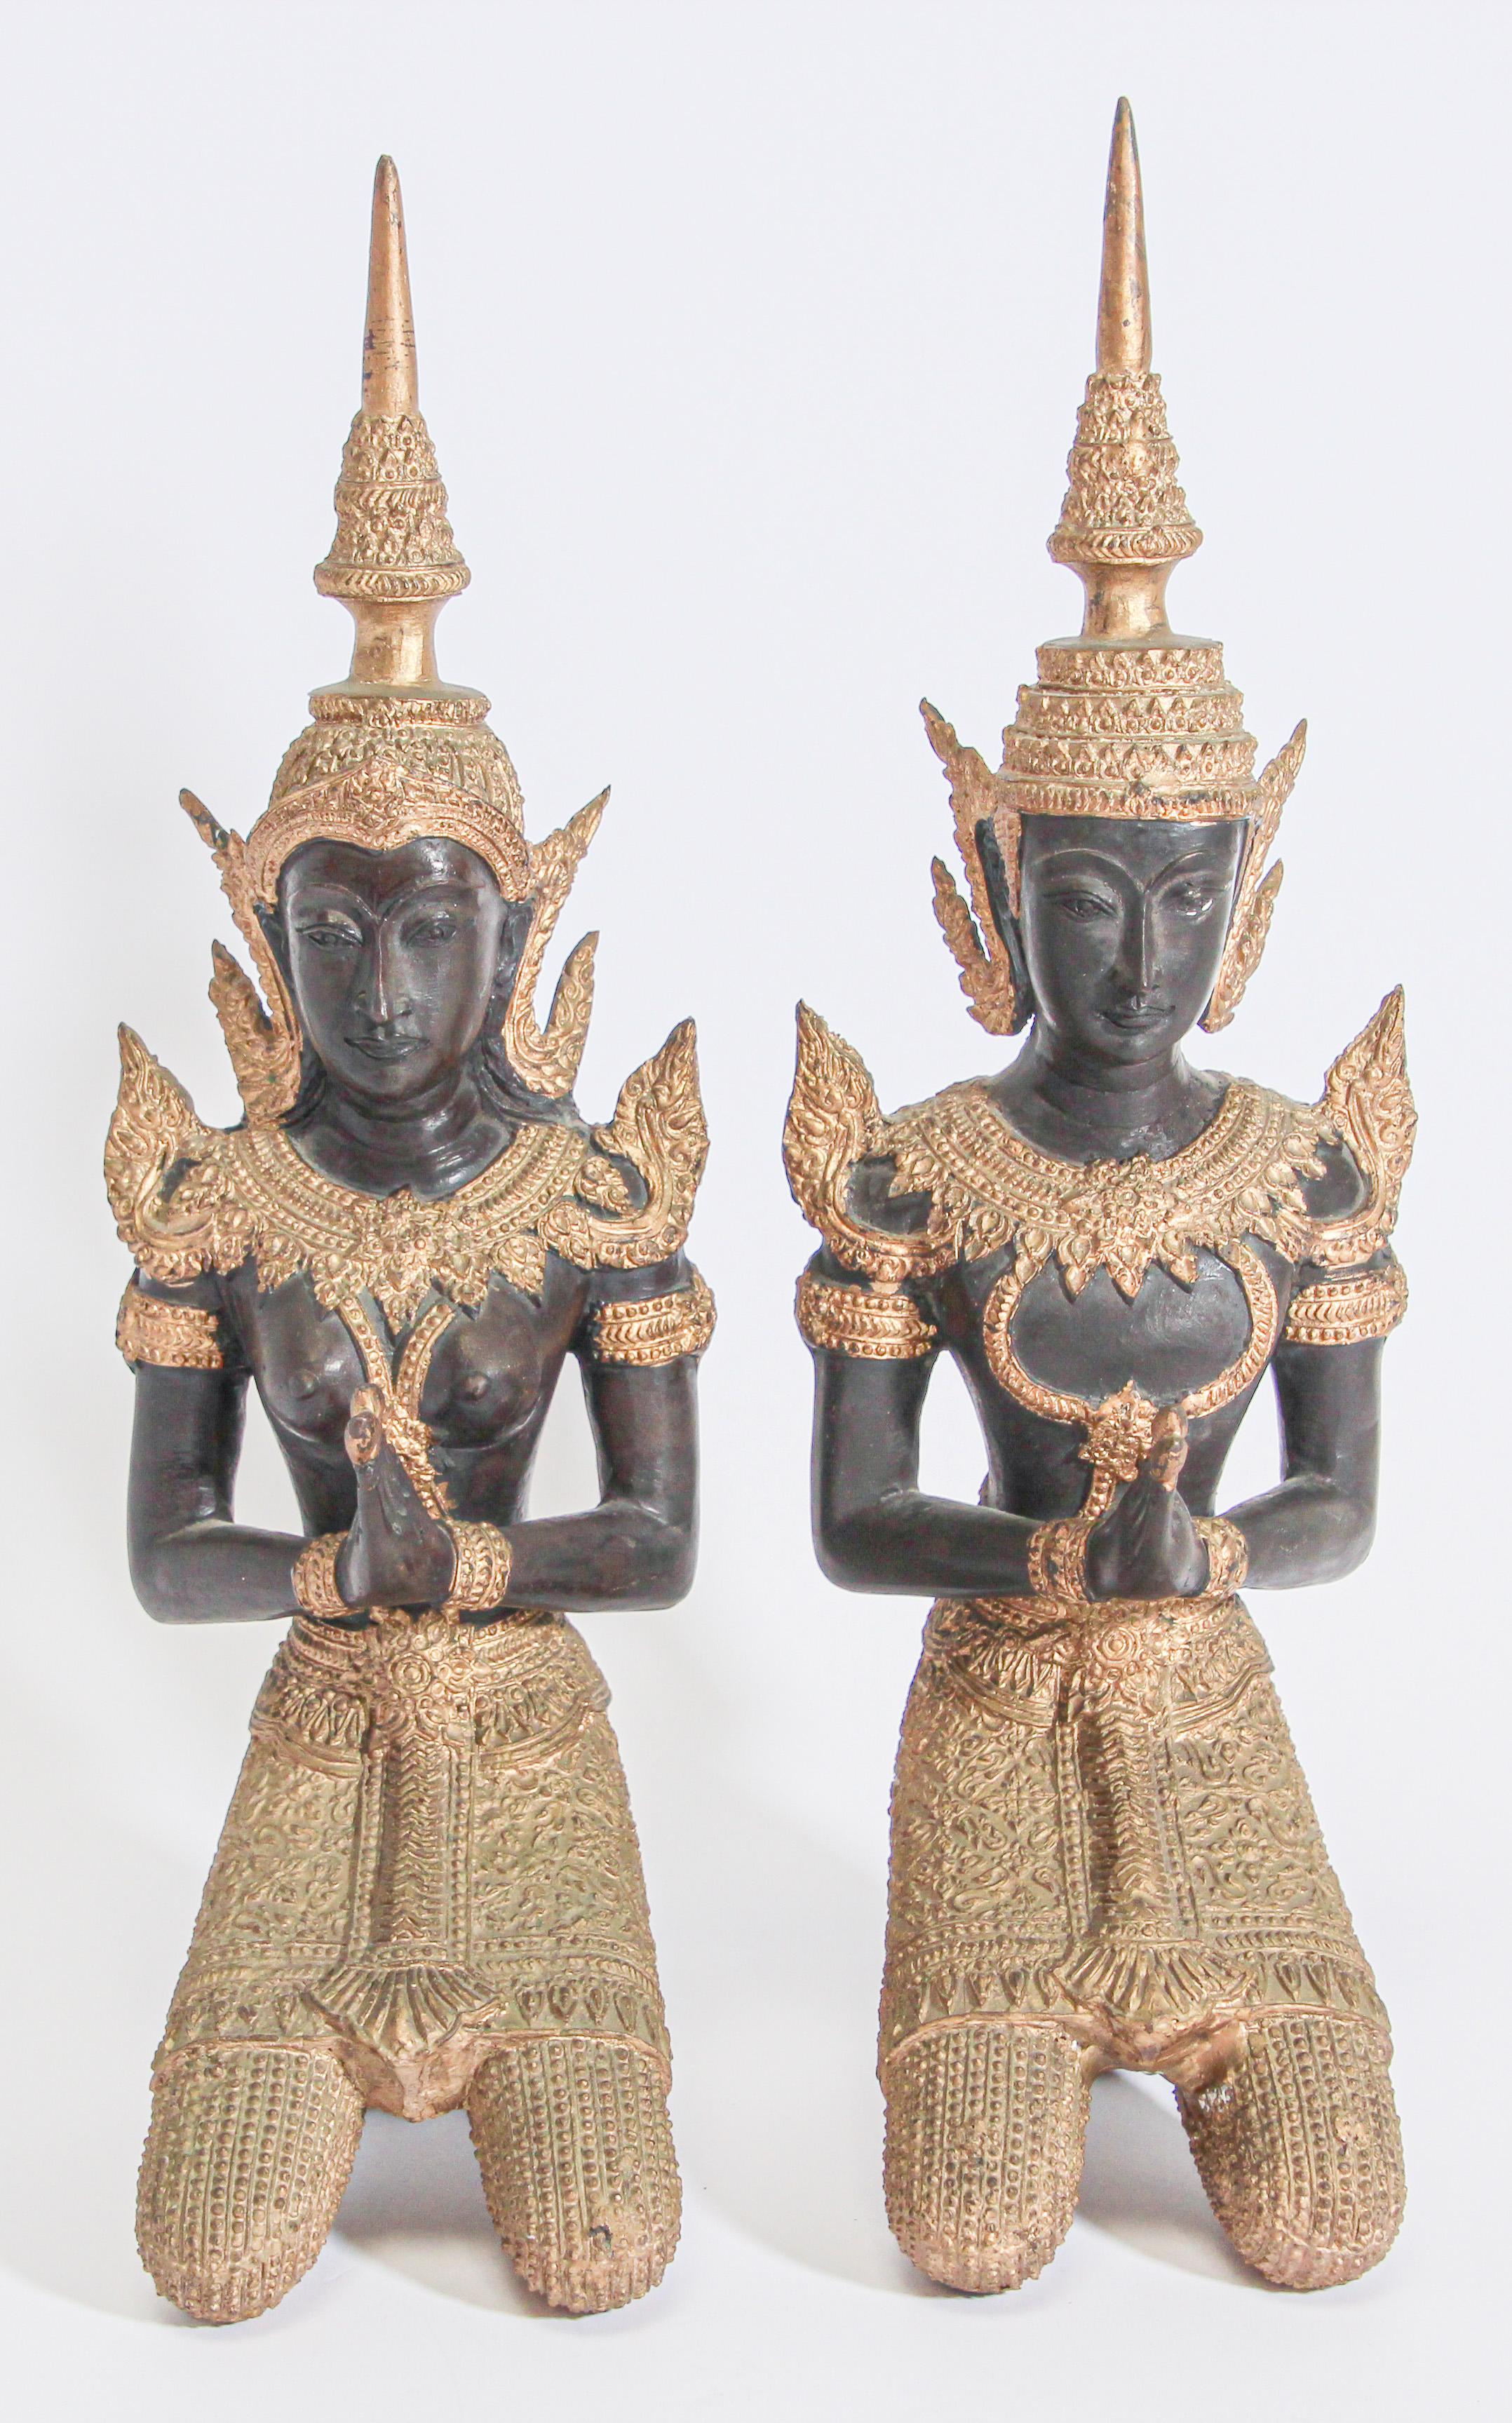 Gilt Kneeling Thai Buddhist gatekeeper male and female angels kneeling praying. 
Intricate Asian bronze Thai Teppanom kneeling Angels Buddha statues in black with the ceremonial costumes and the jewelry adorned with gold leaf details.
Teppanom are